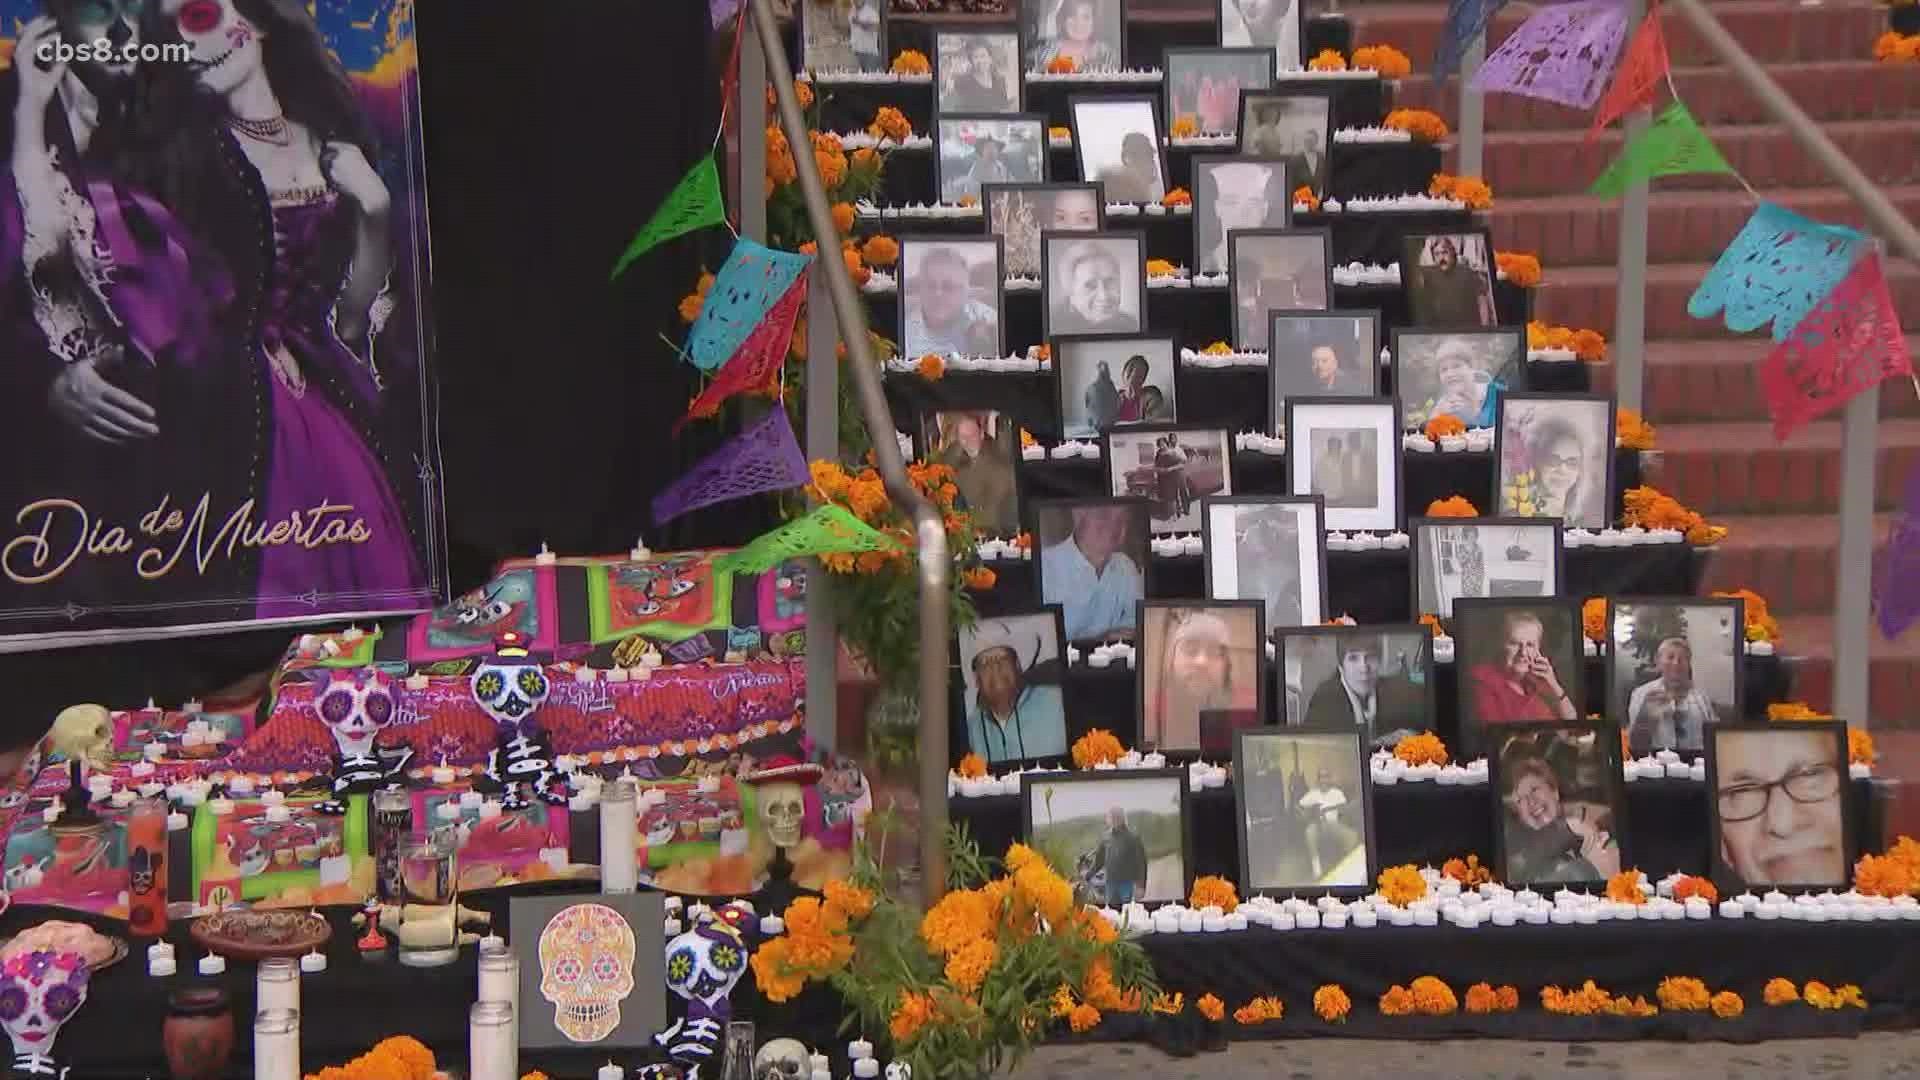 Dia De Los Muertos is a Meso-American tradition observed annually on Nov. 1-2 to honor those who have passed away.